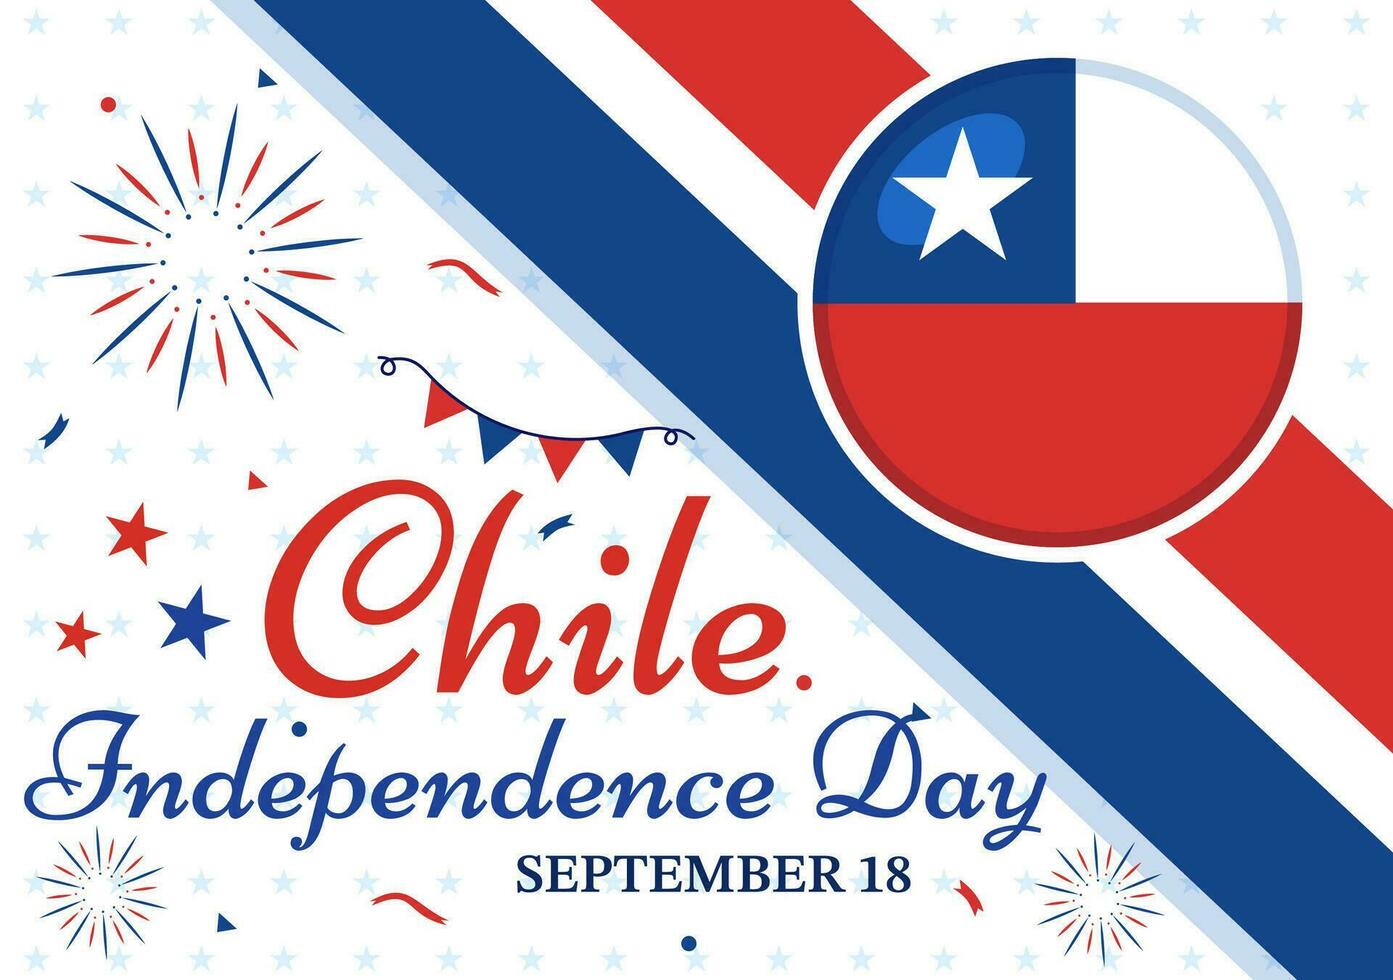 Chile Independence Day Vector Illustration of Fiestas Patrias Celebration with Waving Flag in National Holiday Flat Cartoon Hand Drawn Templates